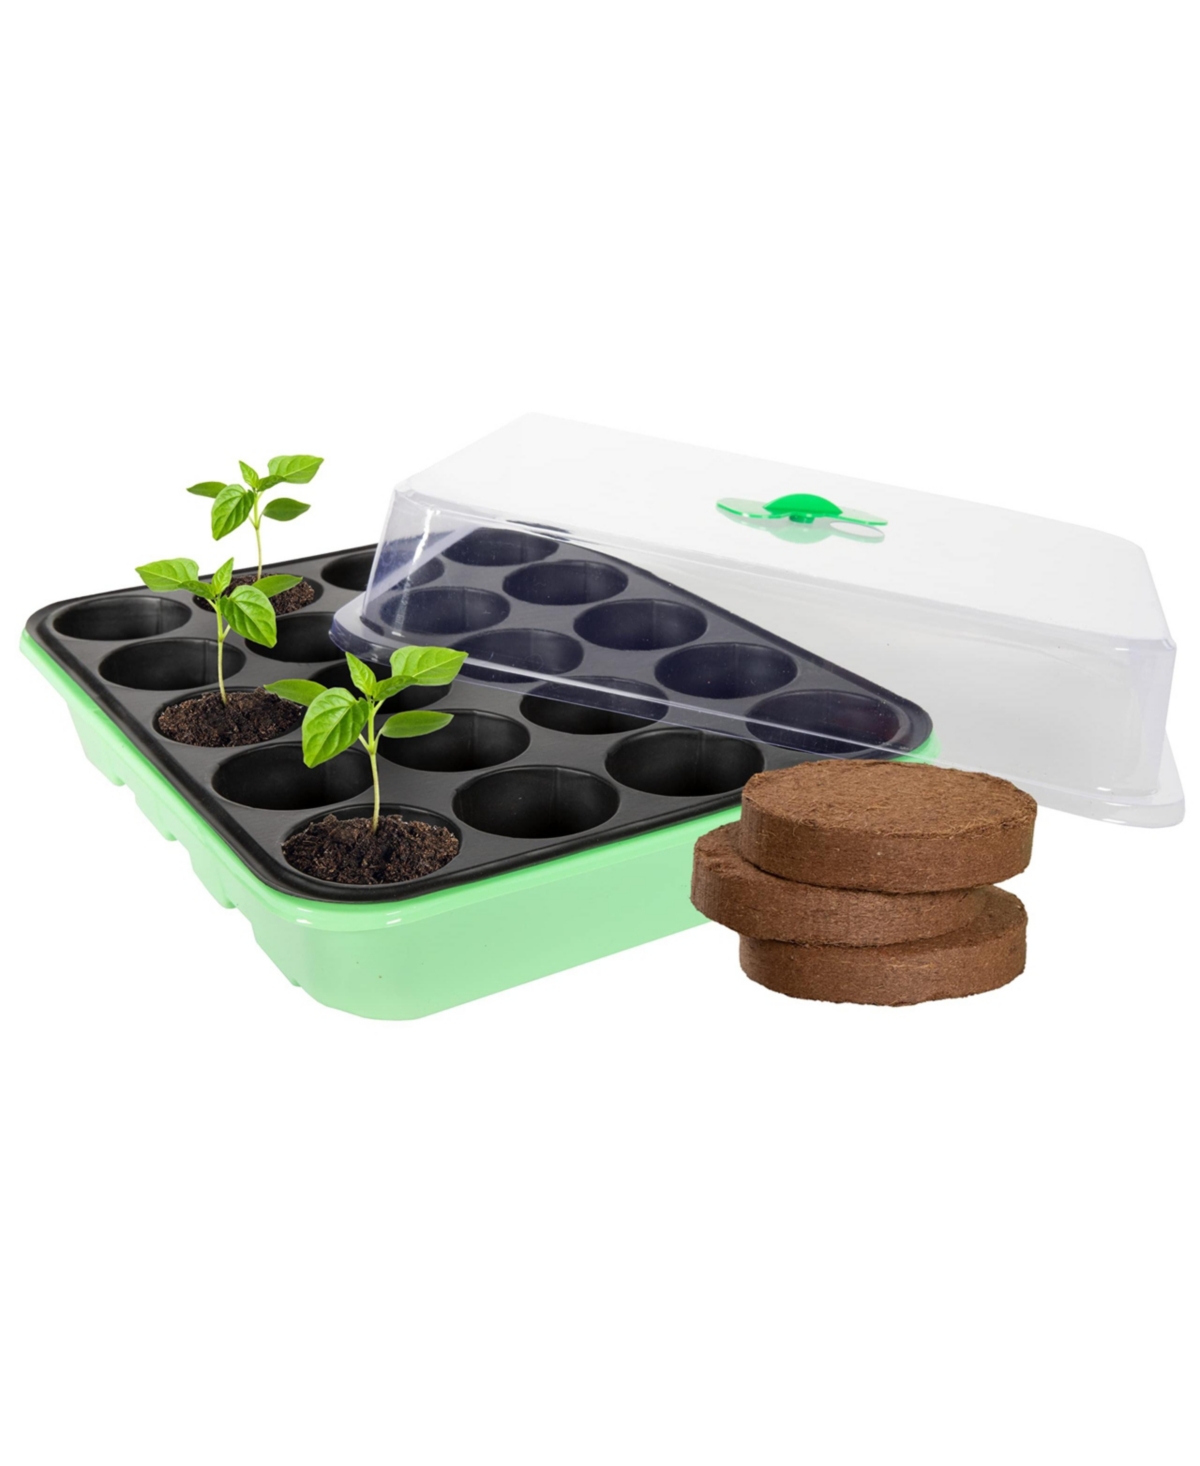 20 Cavity Seed Propagation Kits (2) - Complete with Fiber Soil and Ventilated Greenhouse Trays. Germinate Seeds in a Window or Under Lig